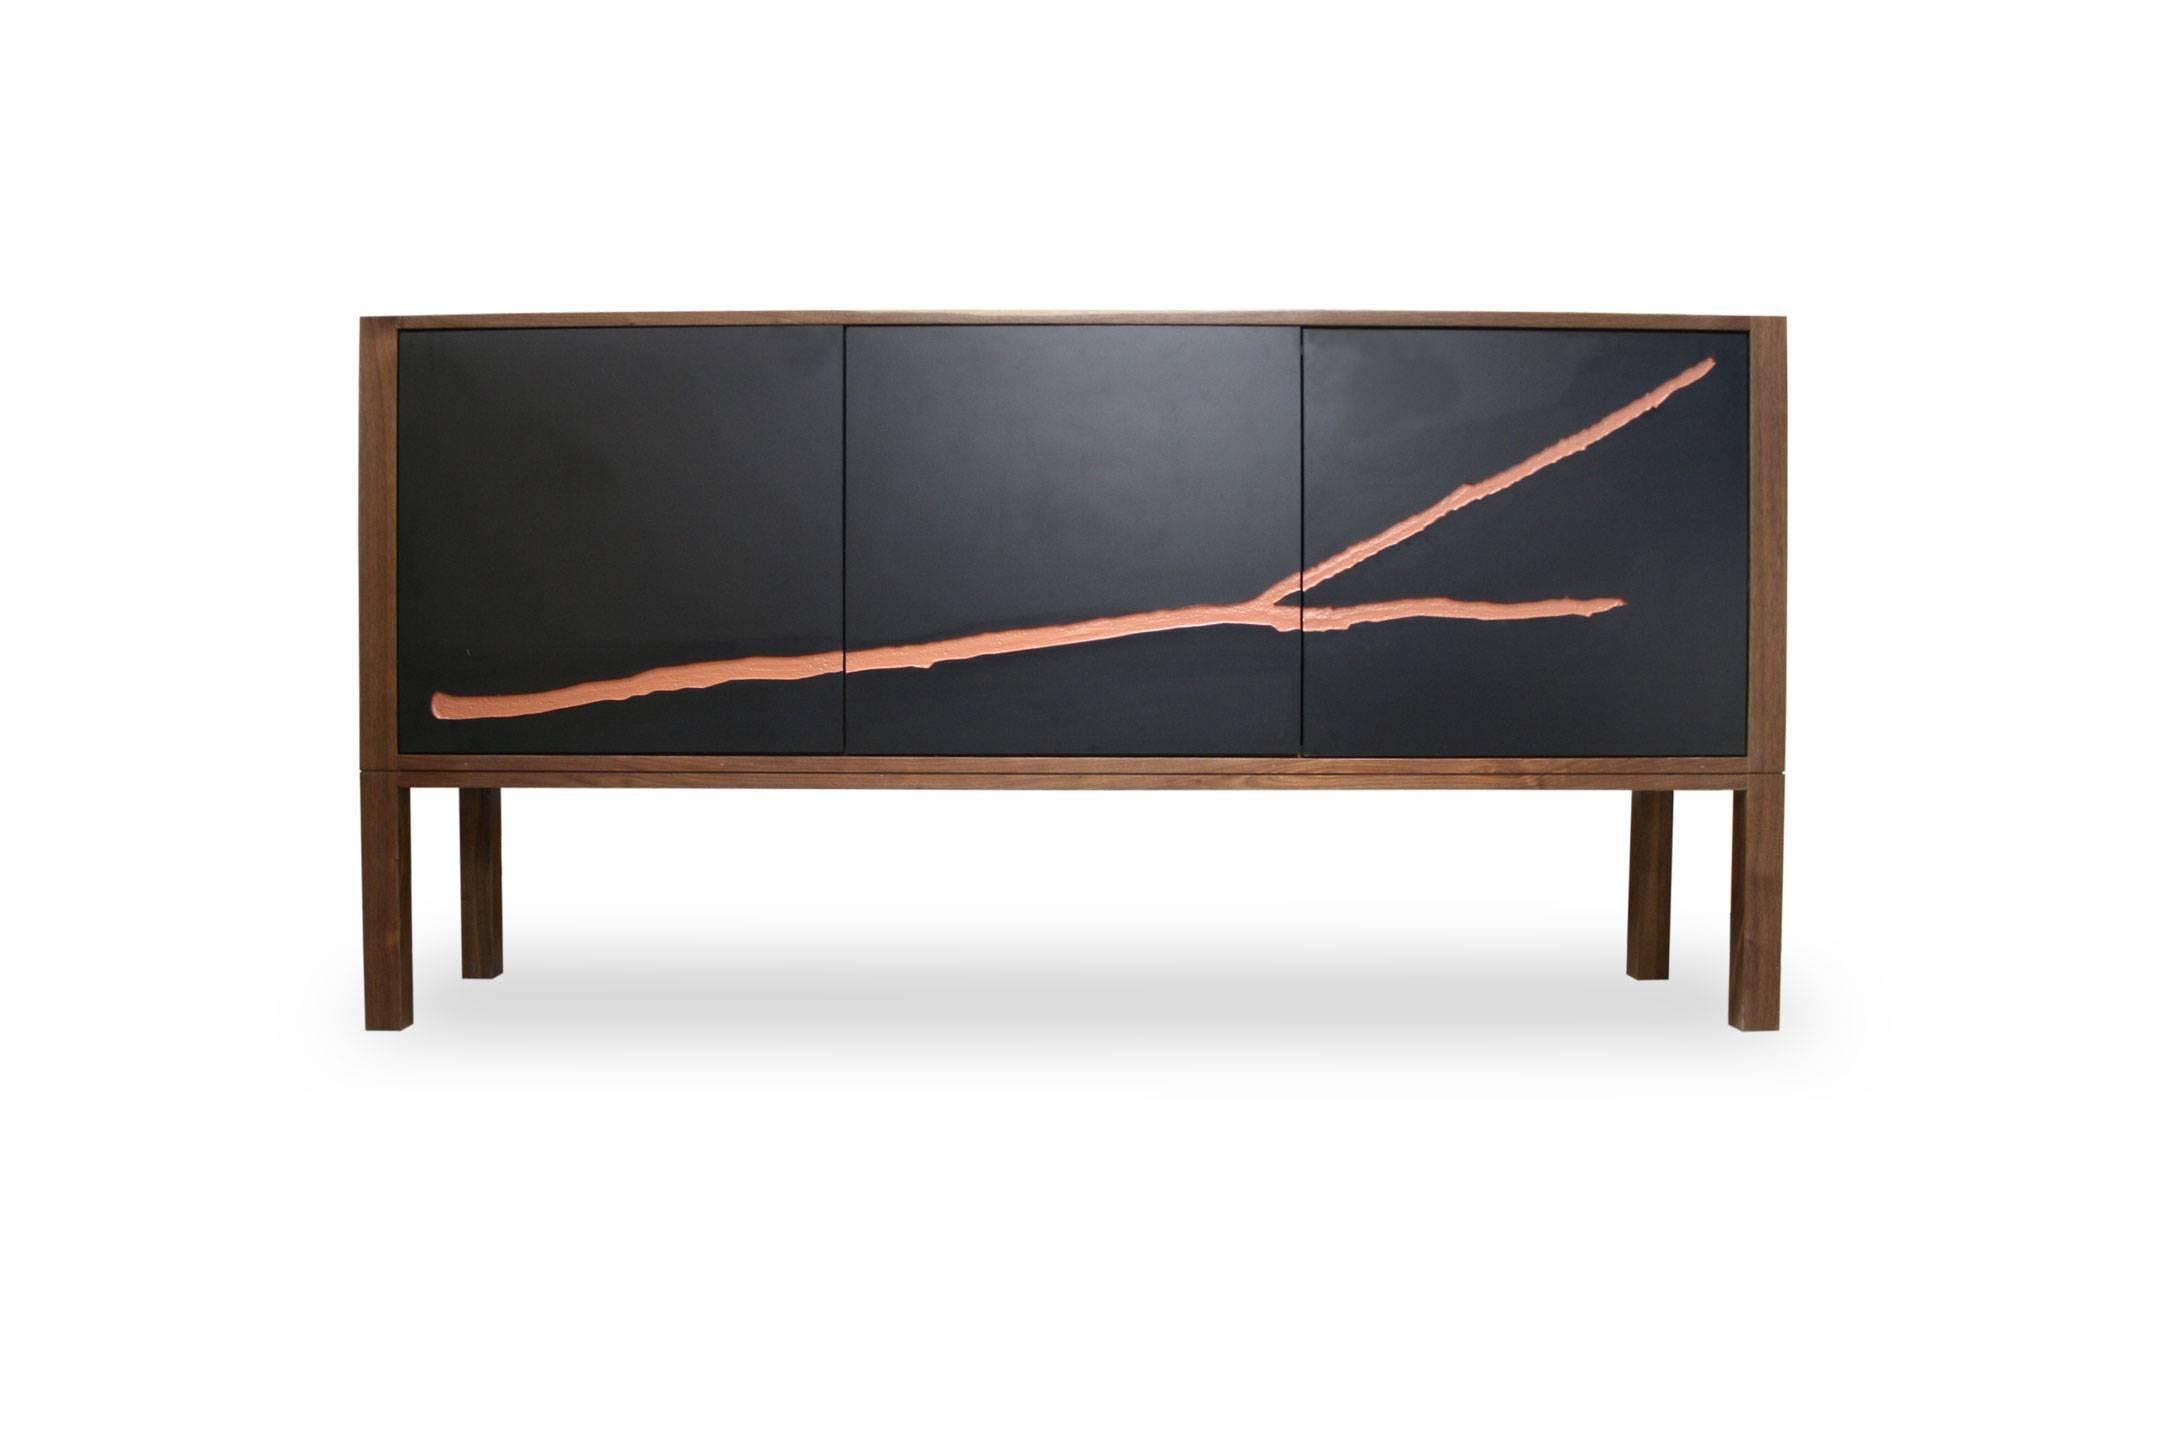 This credenza features three laser-engraved doors with inlaid artwork. The cabinet opens to store anything from stereo equipment to service ware. Inside there is adjustable shelving. The cabinet is made using locally-sourced hardwoods, including